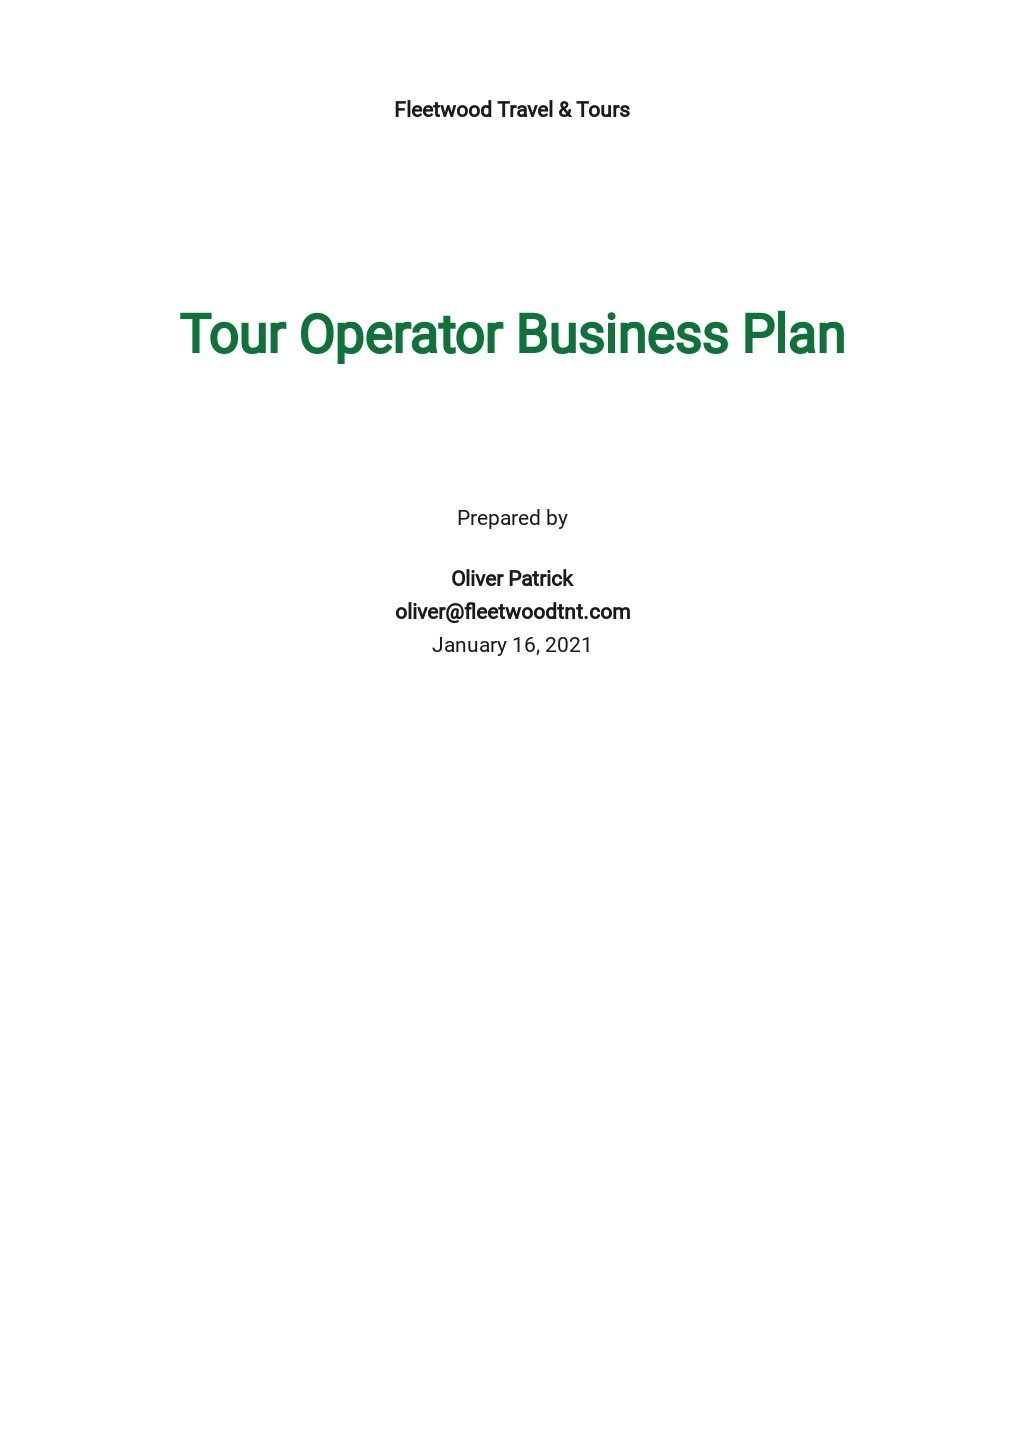 business plan of a tour operator